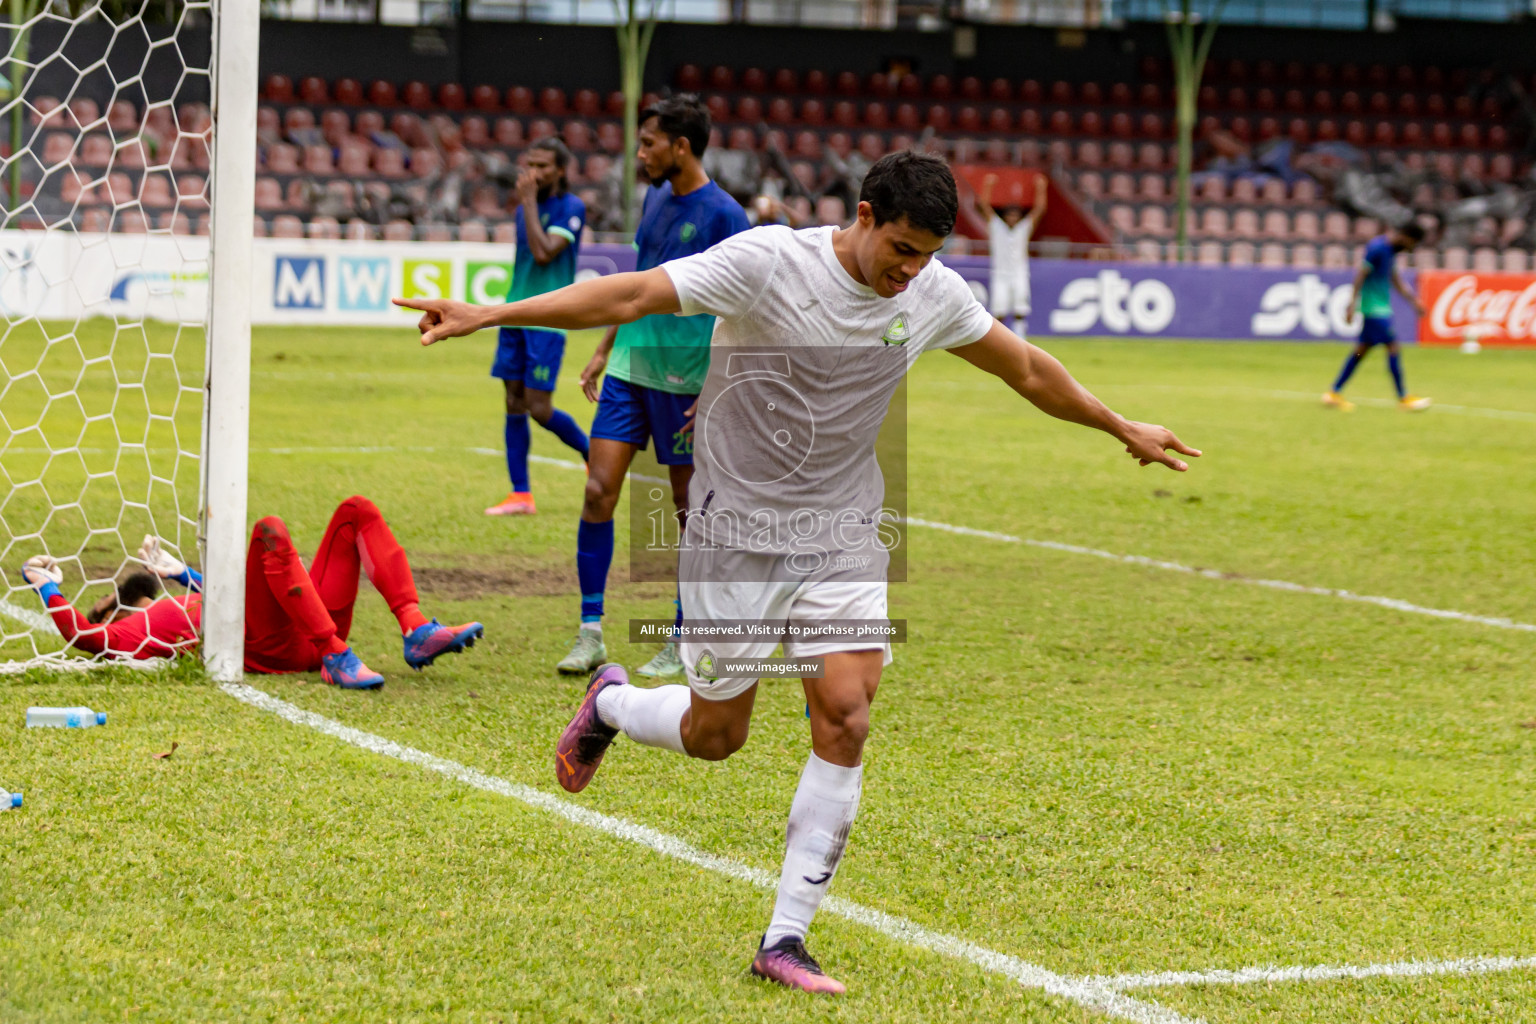 Super United Sports vs Green Streets in Ooredoo Dhivehi Premier League 2021/22 on 06 July 2022, held in National Football Stadium, Male', Maldives